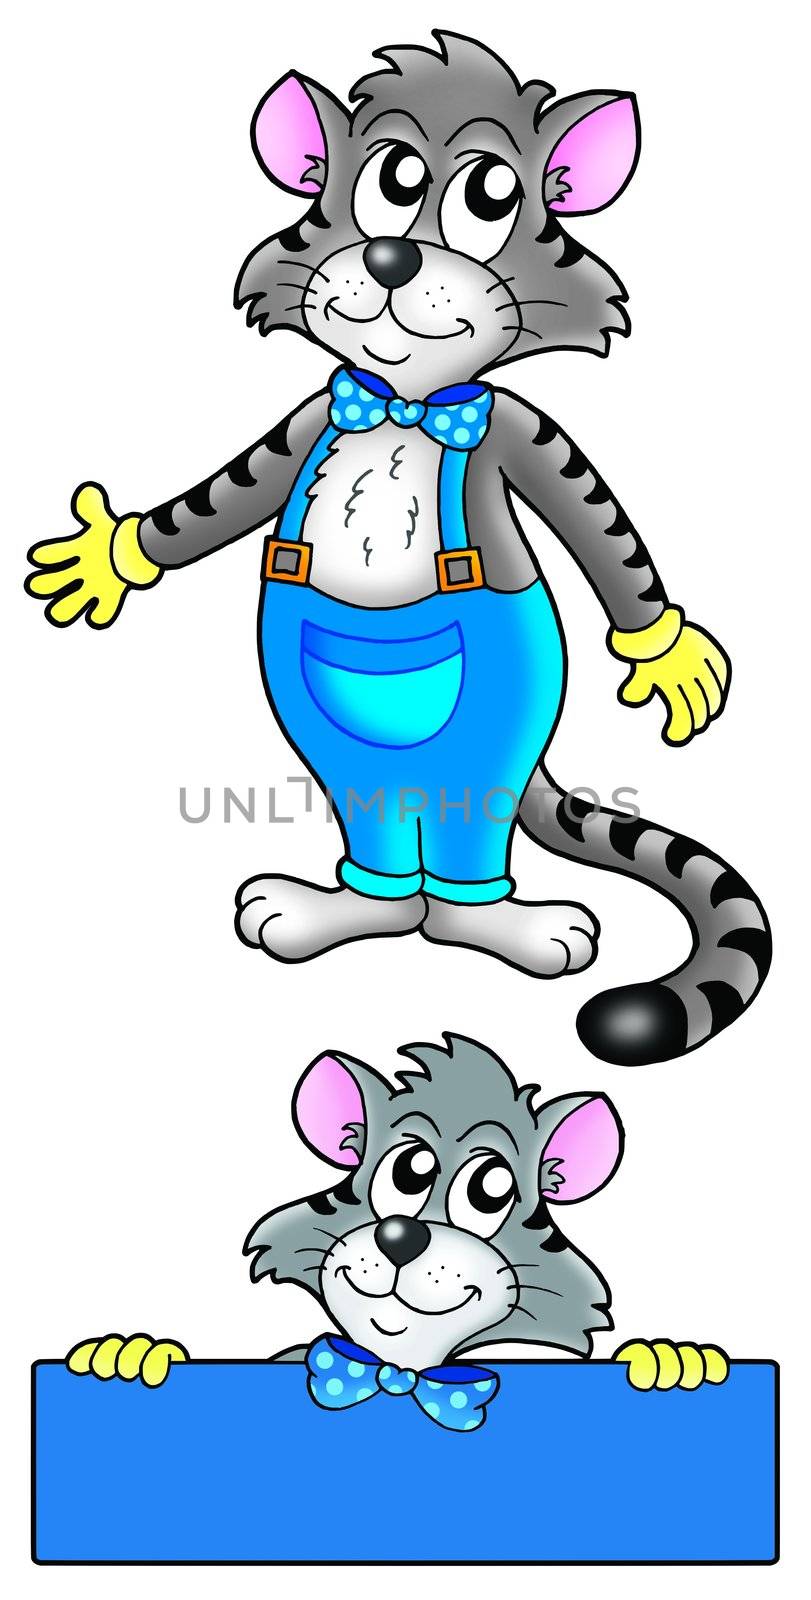 Cat in overalls - color illustration.